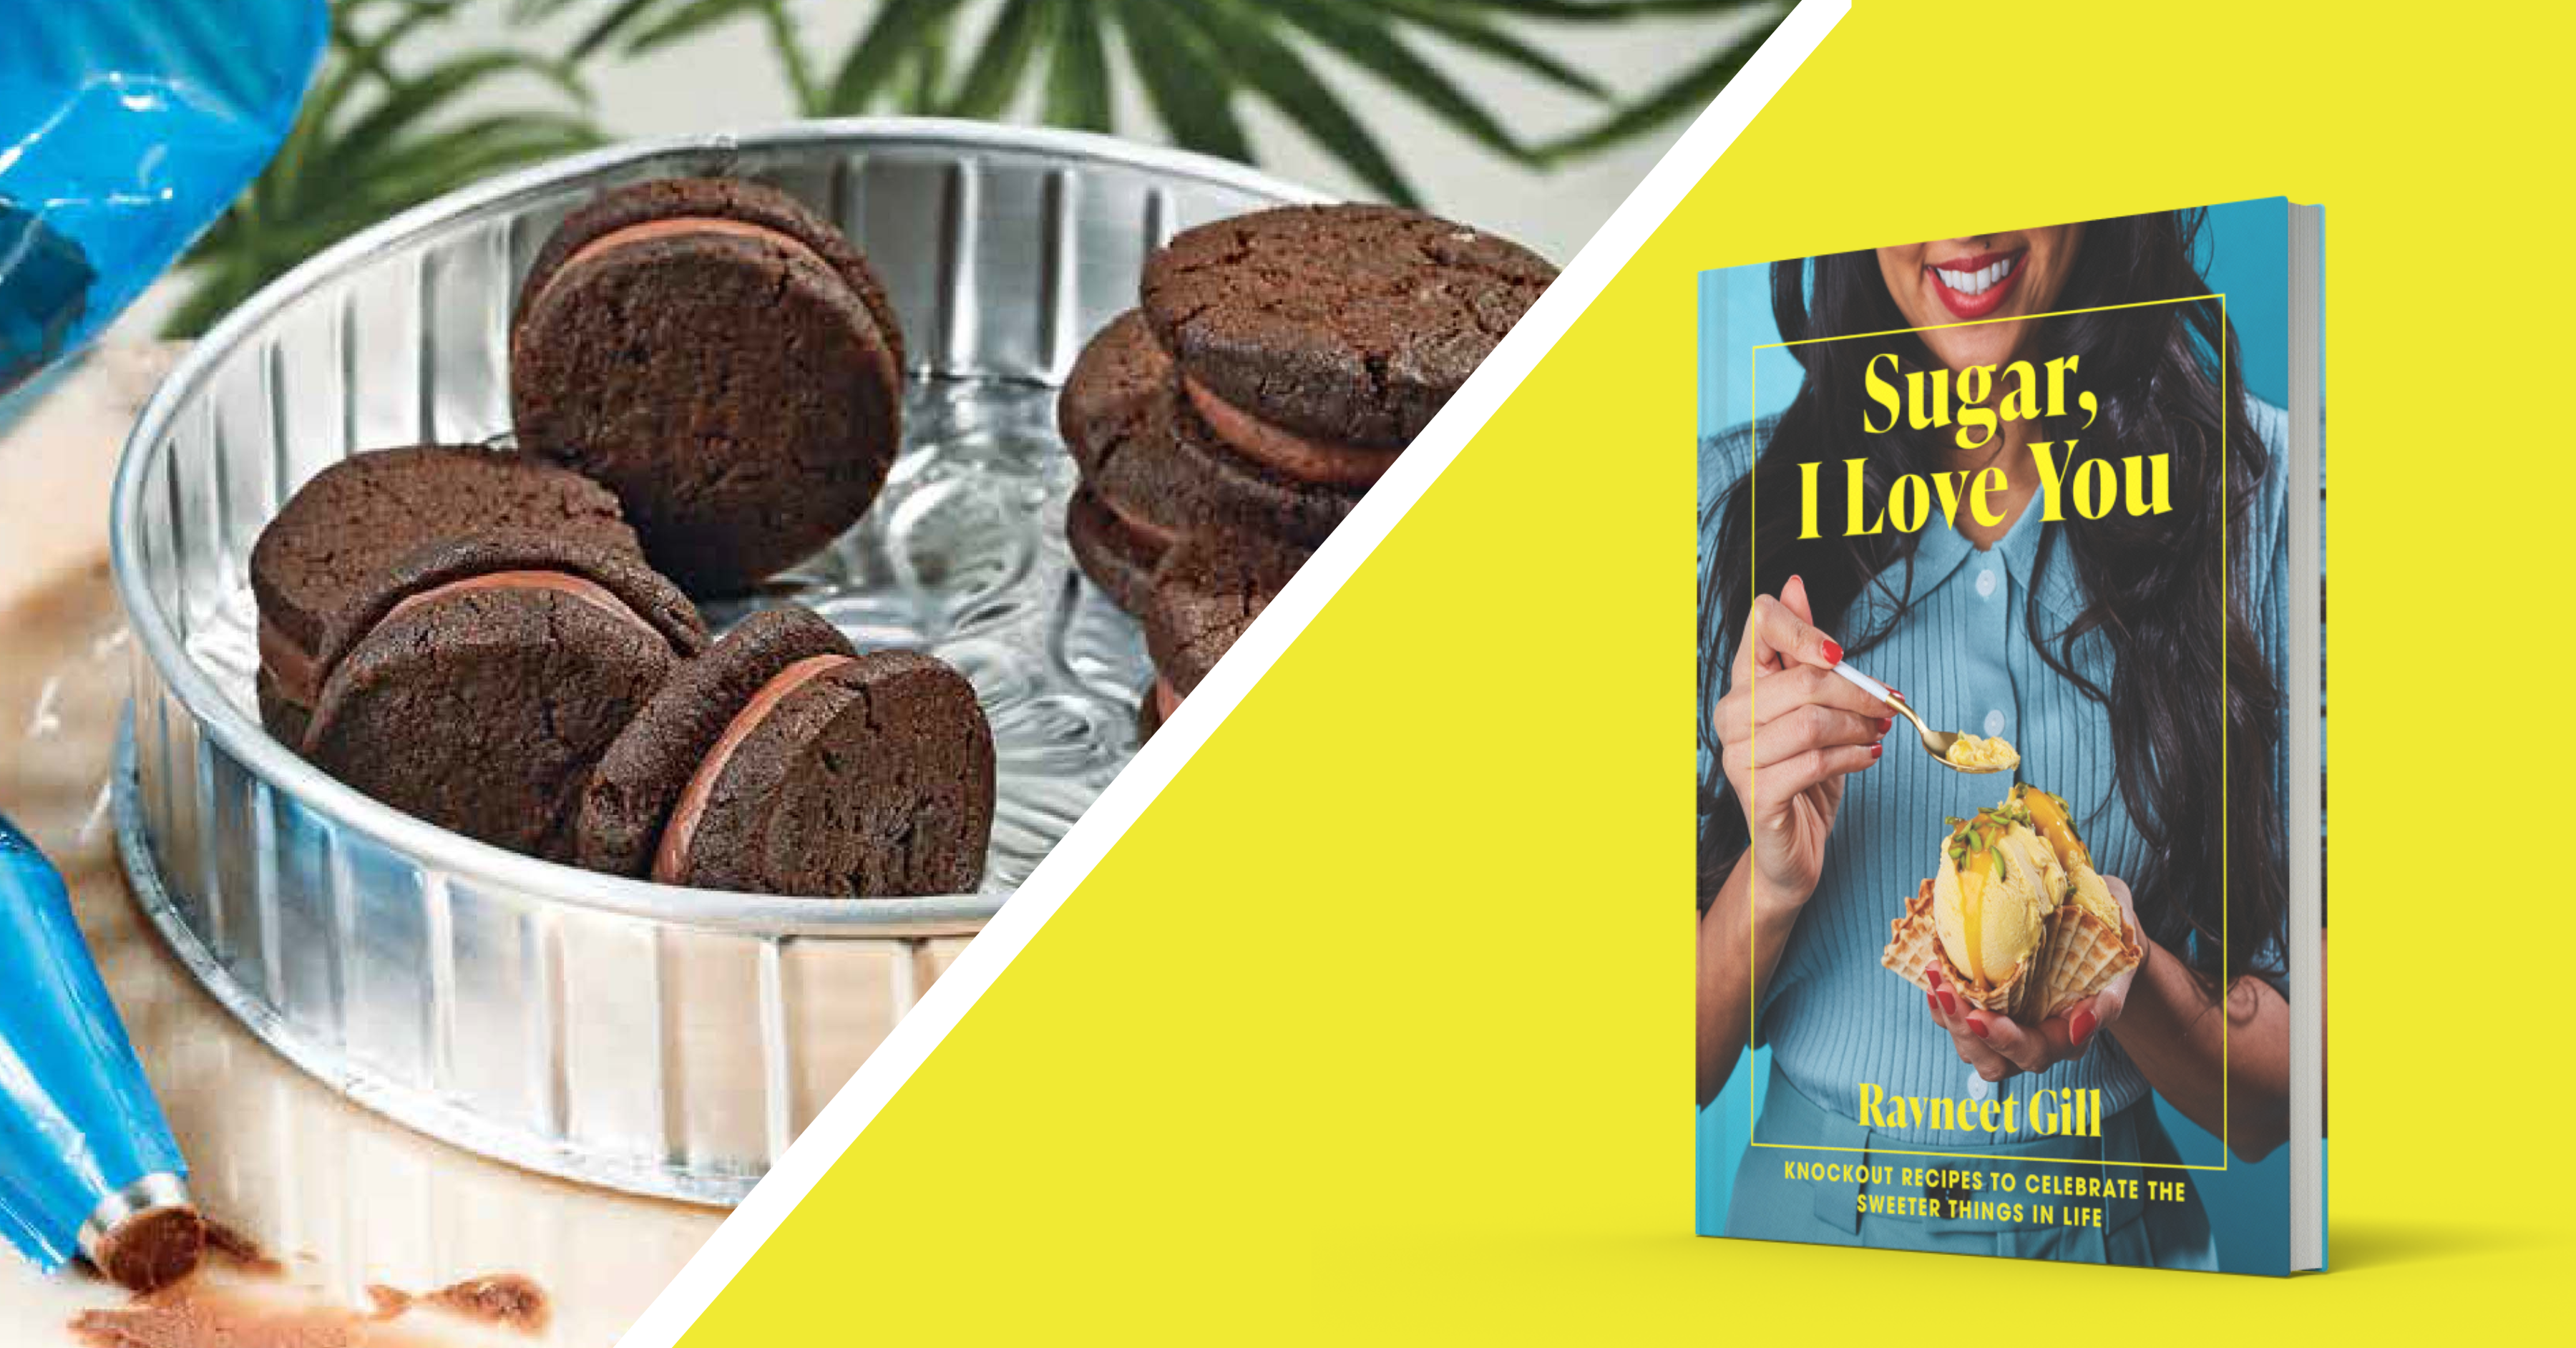 Crunchy Chocolate Sandwich Biscuits next to Sugar I Love You book